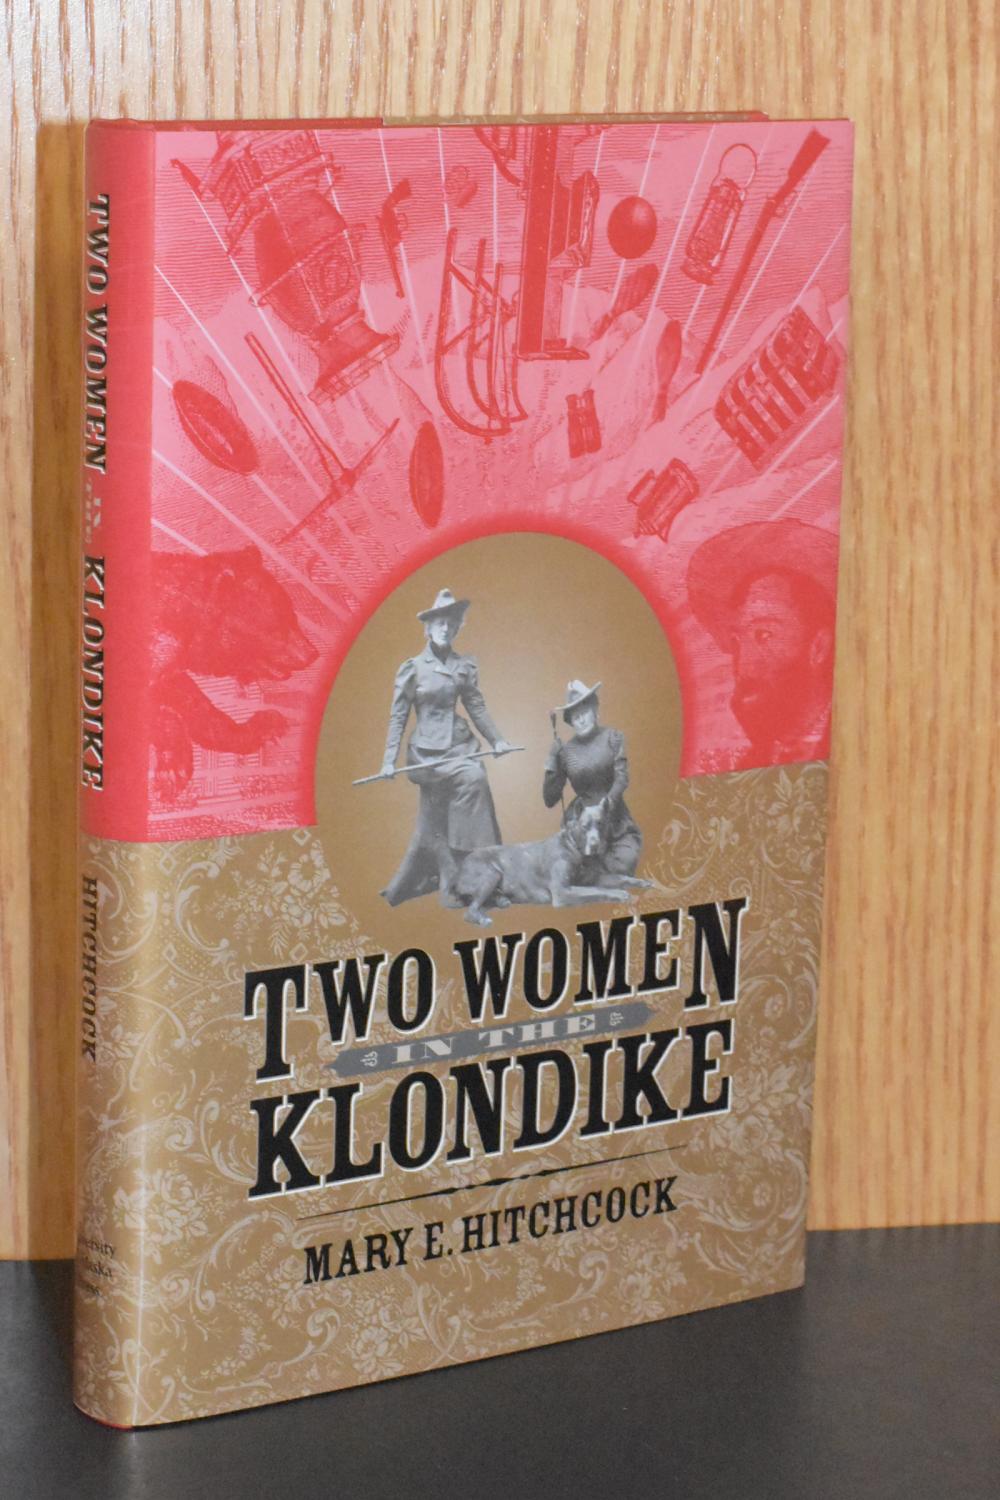 Two Women in the Klondike (Classic Reprint Series) - Mary E. Hitchcock